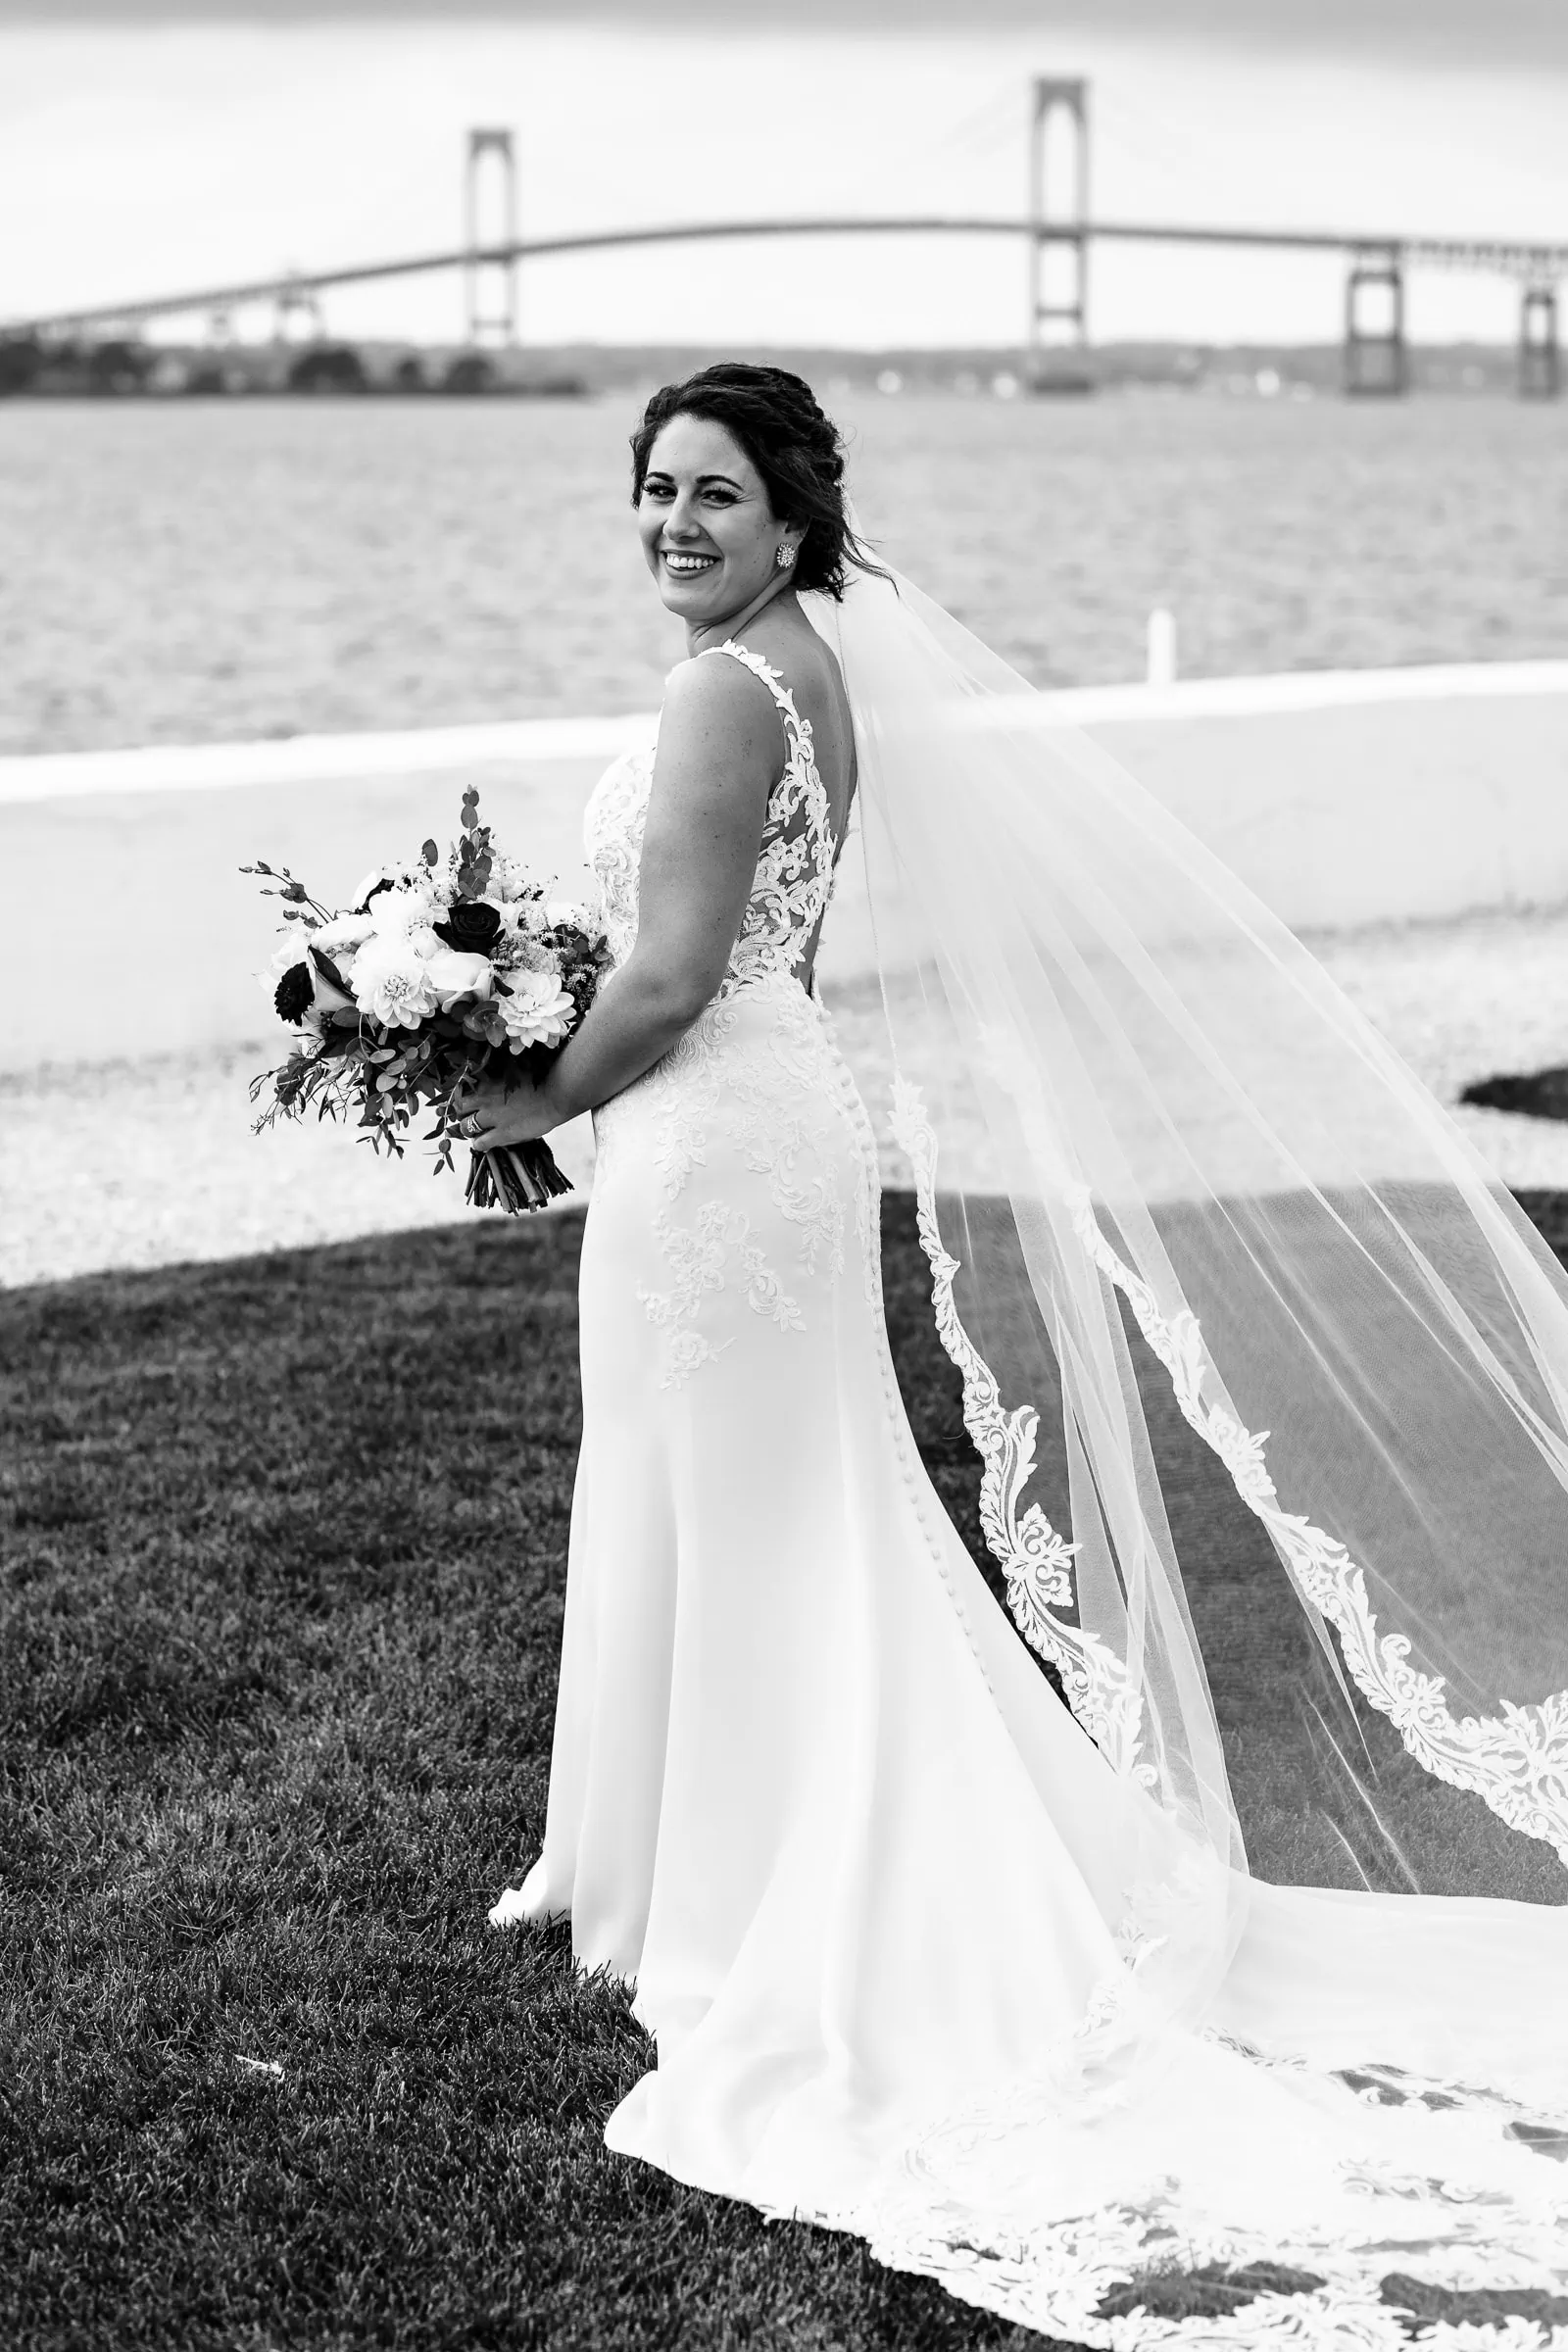 A bride in white lace with flowing veil holding flowers looks back over her shoulder smiling with the Newport pell bridge in the background